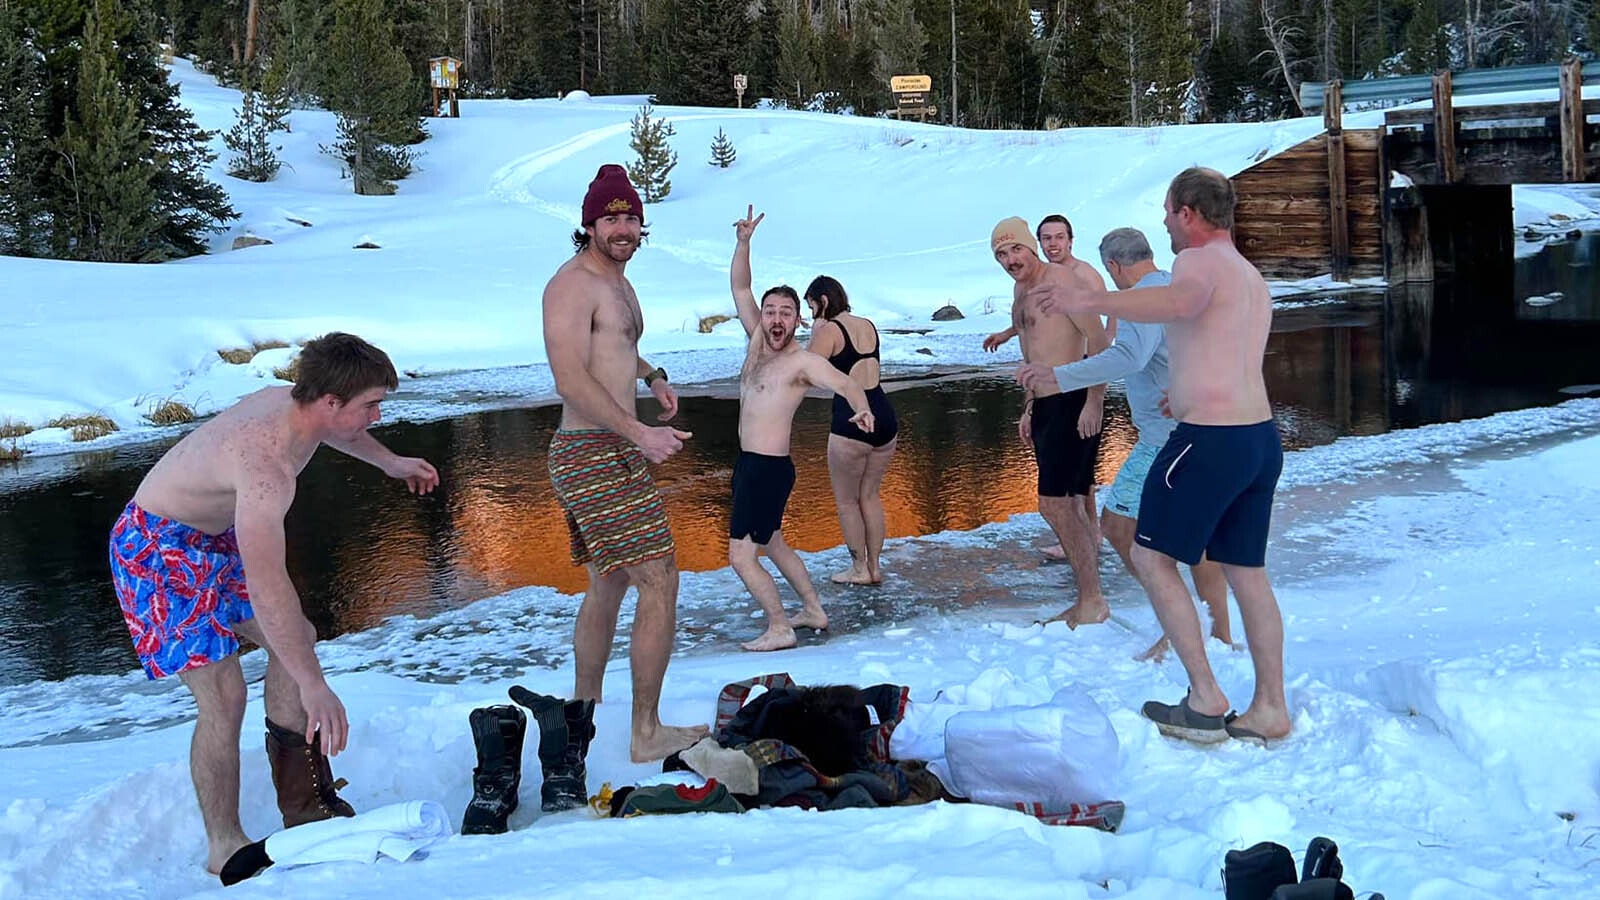 A New Year's Day tradition at Brooks Lake Lodge is an icy polar plunge.